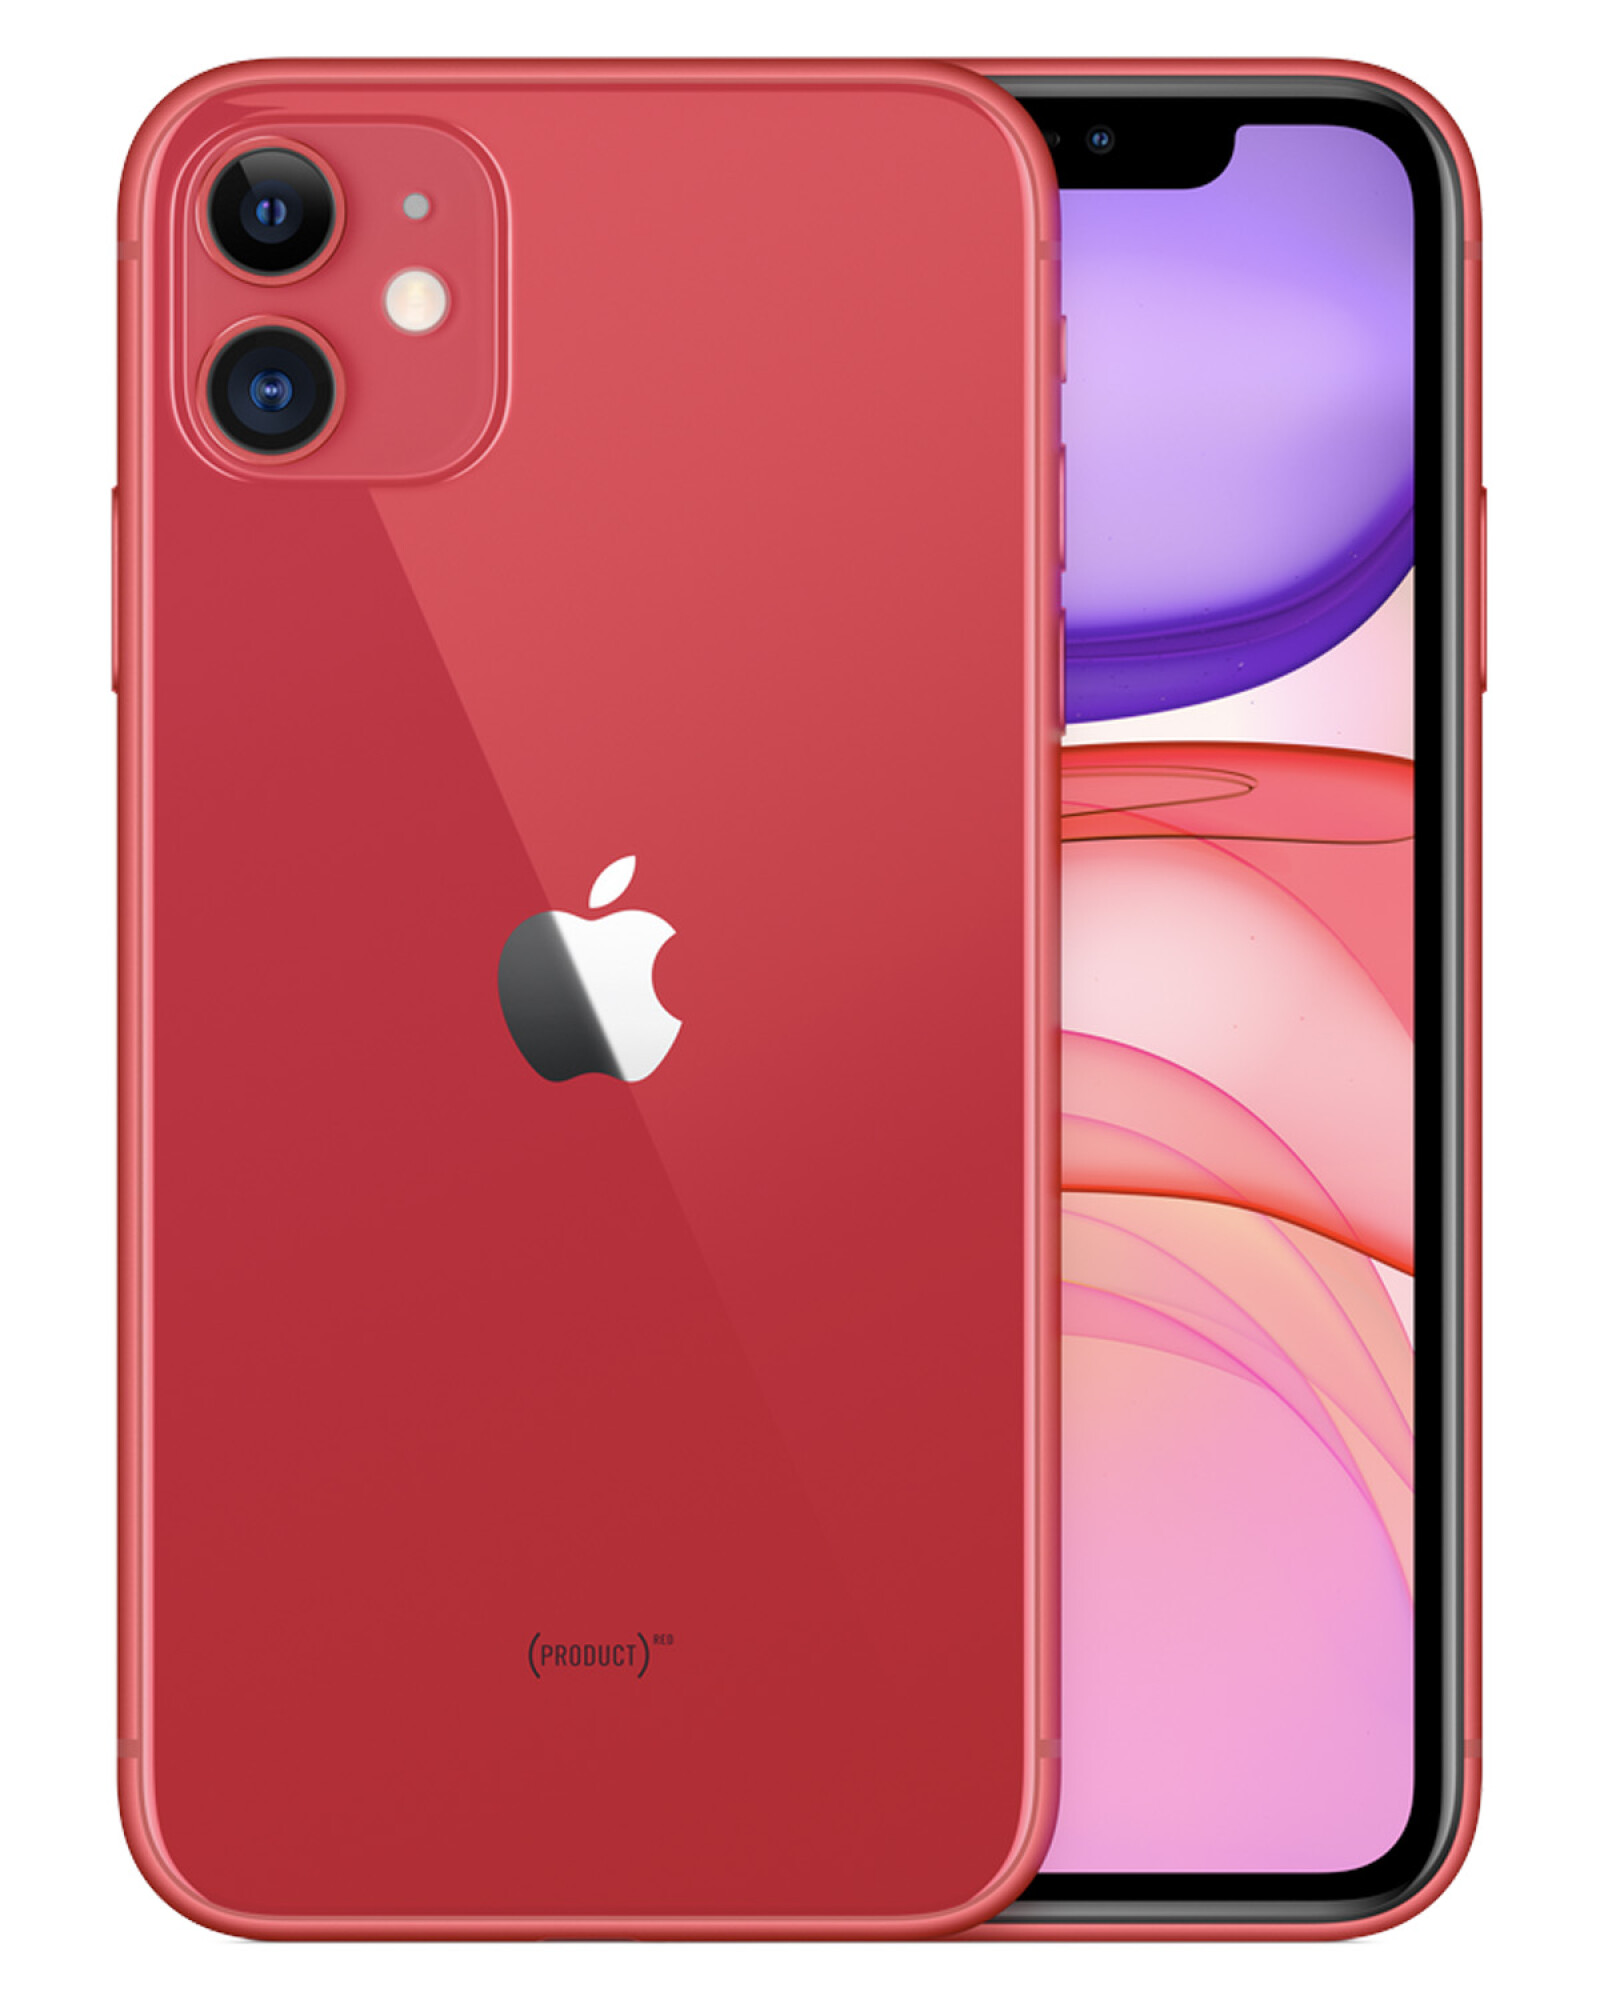 Refurbished Retail Grade Apple iPhone 11 64GB HSO Unlocked - Red IPH11-64GB-RD-A UPC  - APPLE